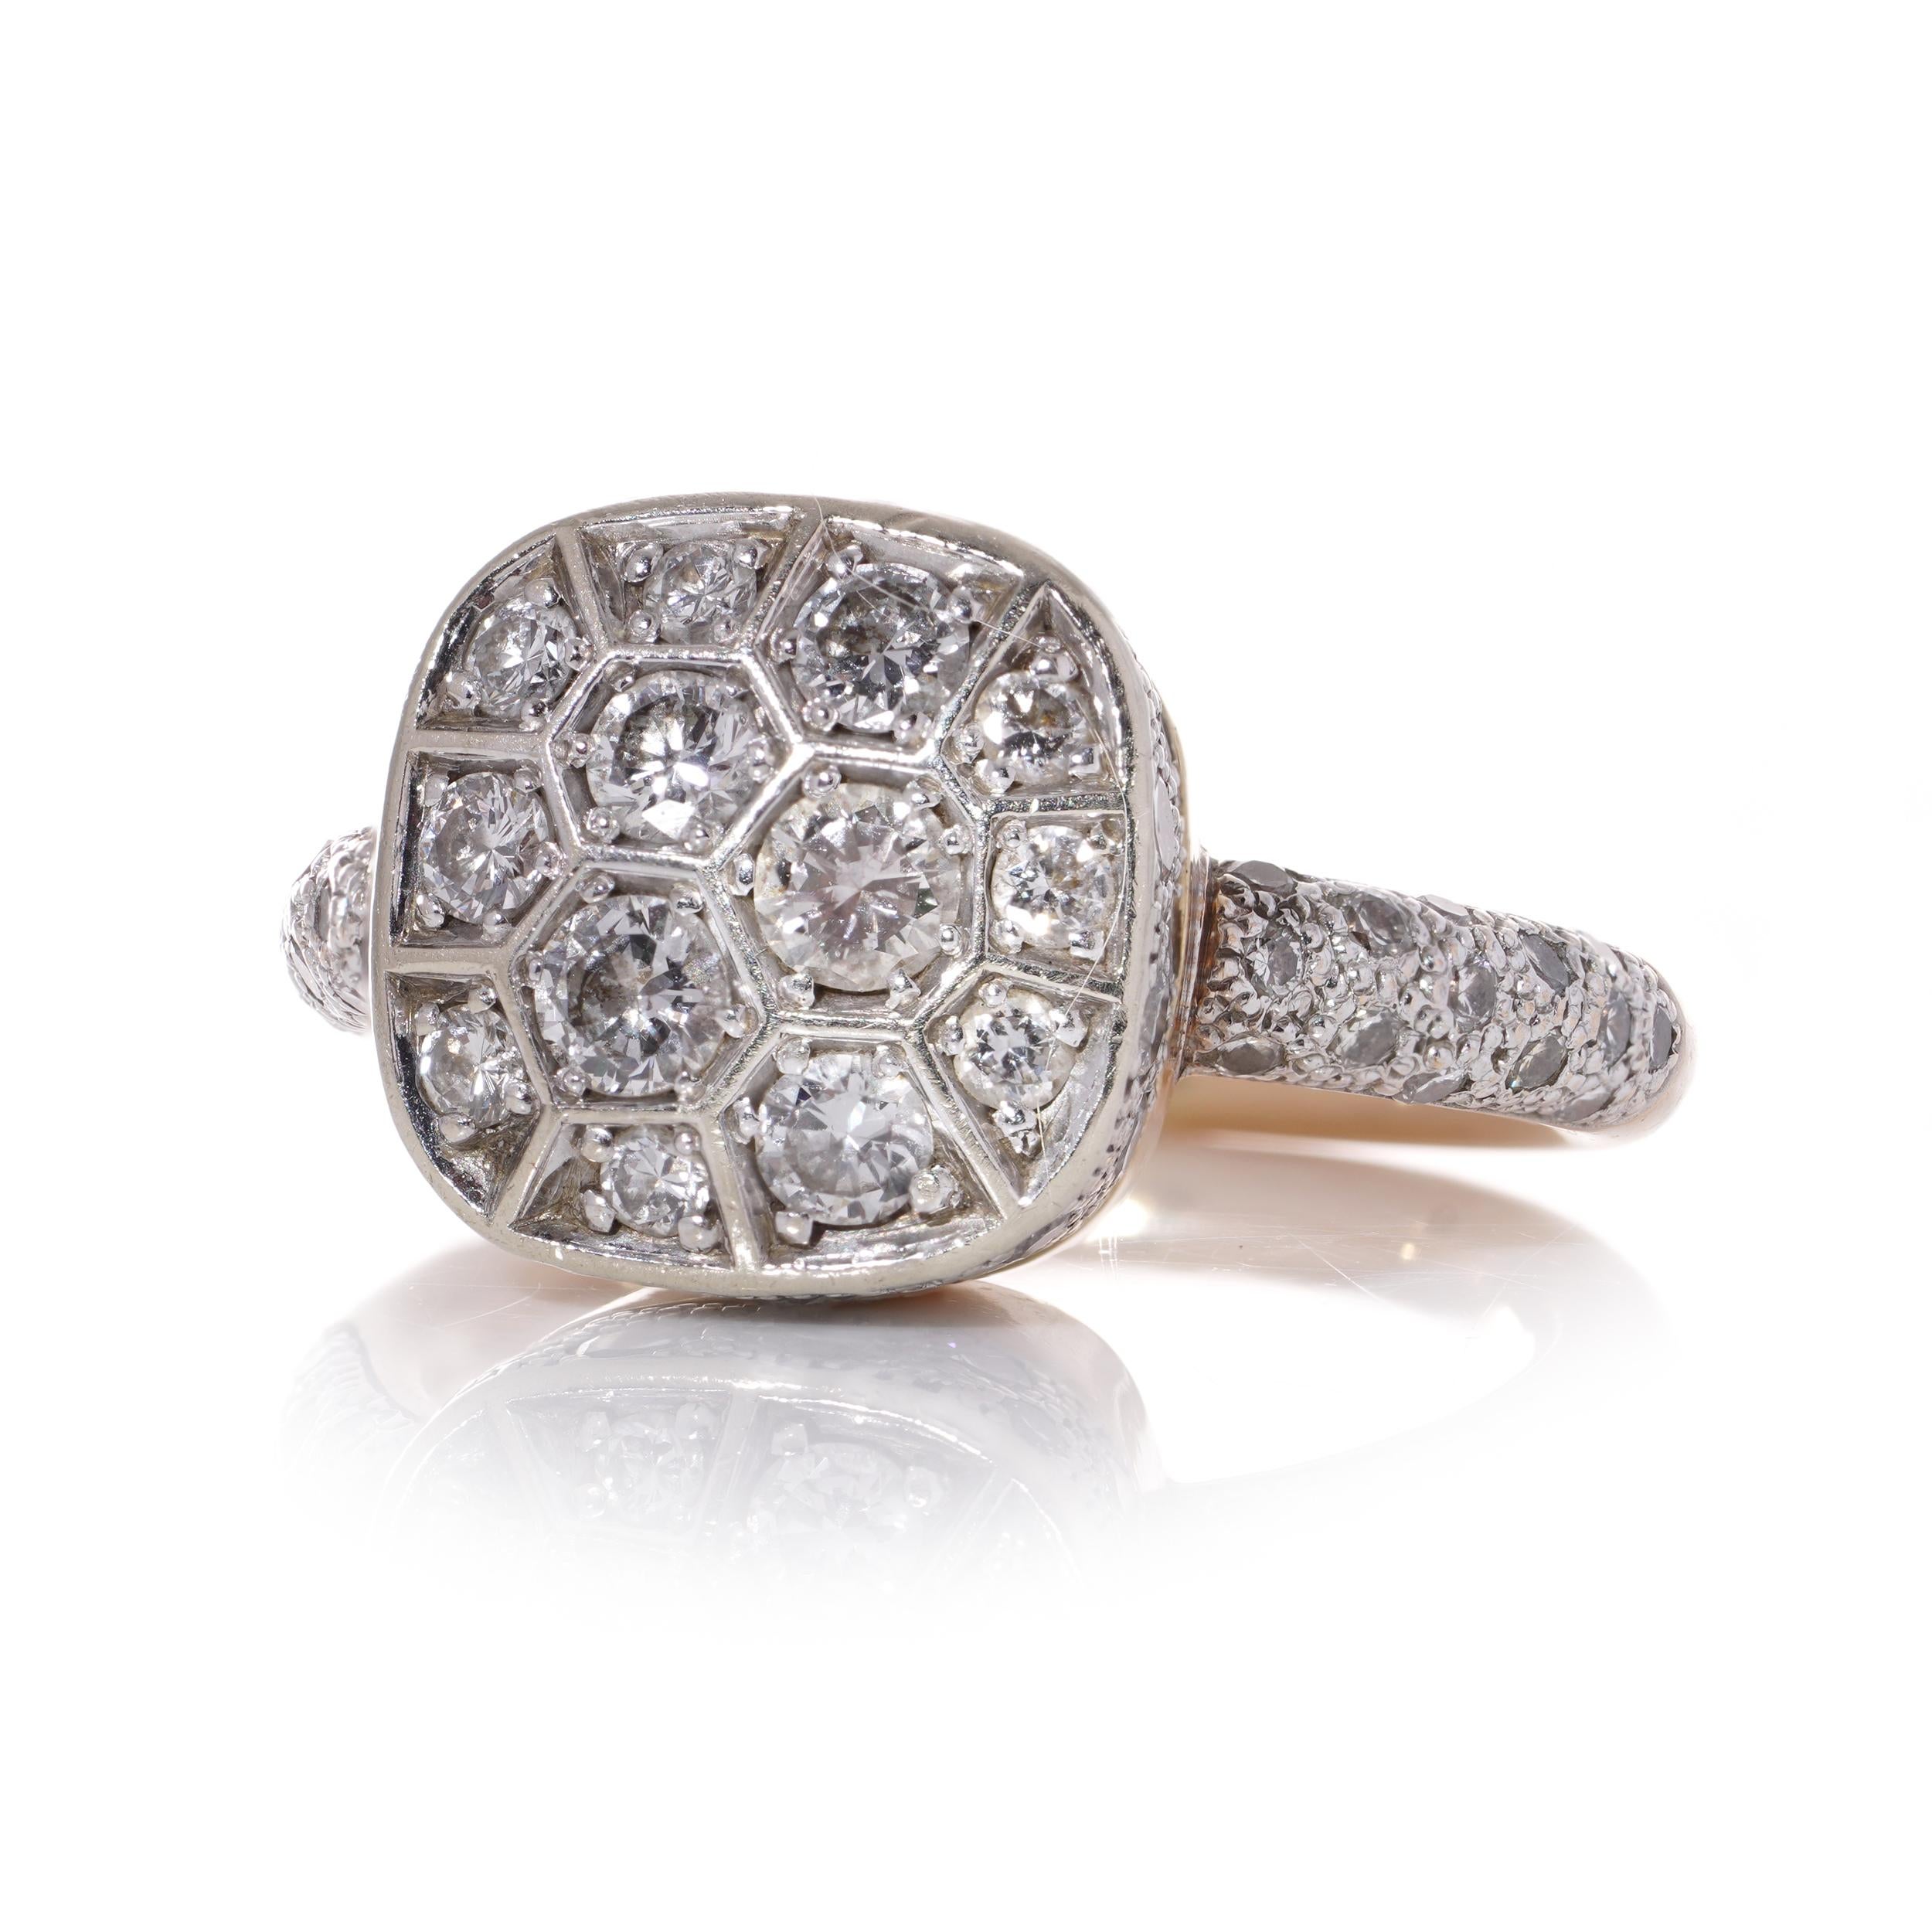 Pomellato 18kt white and rose gold Nudo Solitaire Assoluto ring. 

The Nudo Solitaire Assoluto ring prominently features diamonds, taking on a central role. White gold is utilized to set white diamonds, resulting in a radiant and warm glow.

This